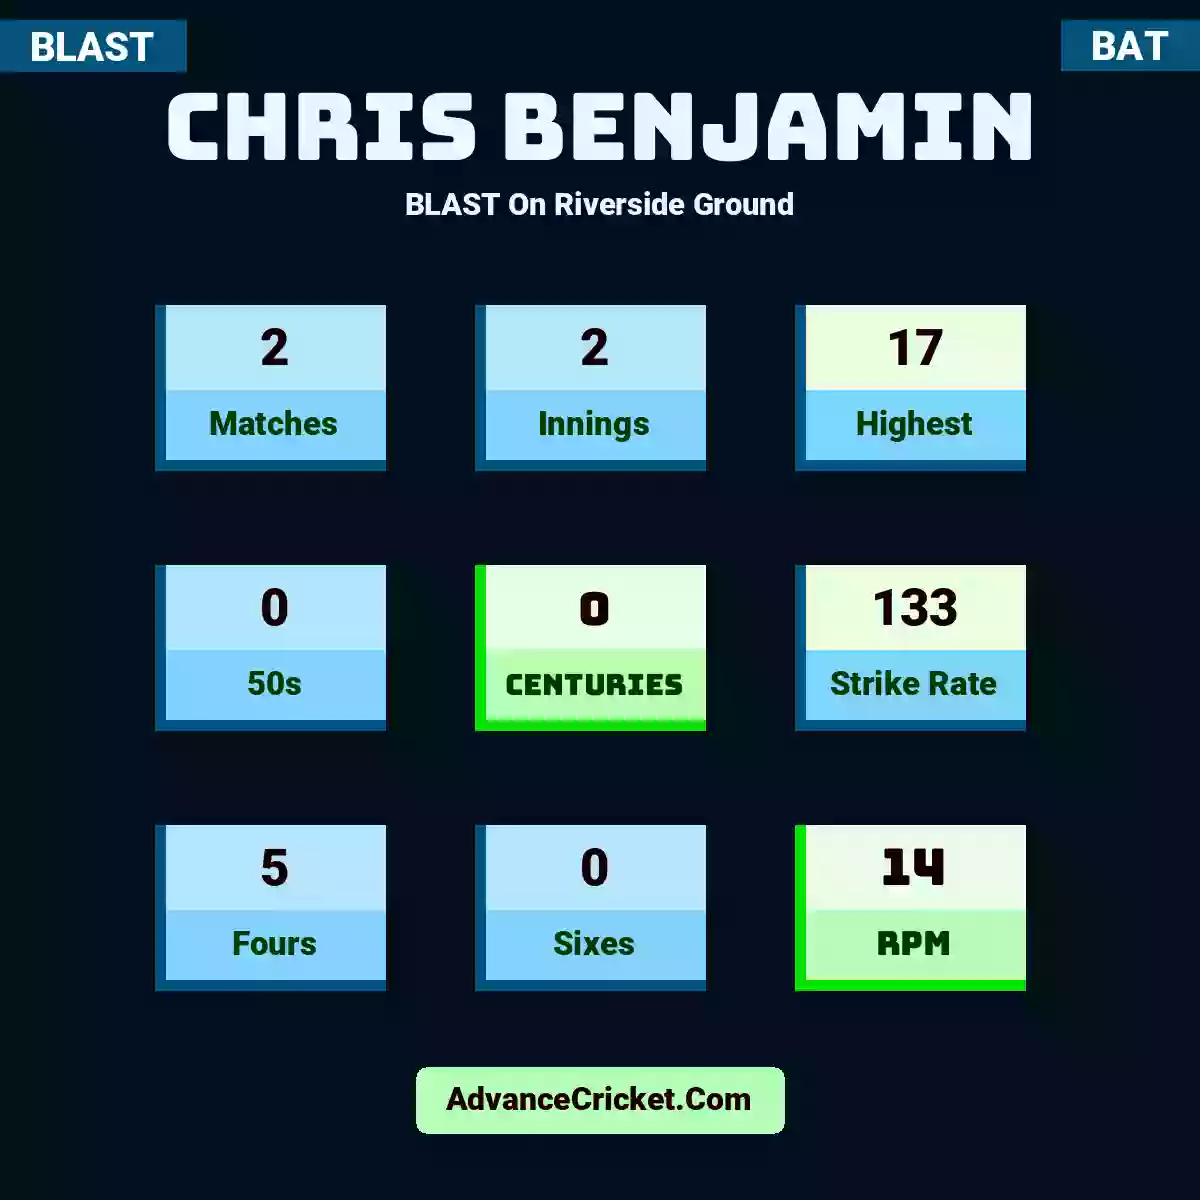 Chris Benjamin BLAST  On Riverside Ground, Chris Benjamin played 2 matches, scored 17 runs as highest, 0 half-centuries, and 0 centuries, with a strike rate of 133. C.Benjamin hit 5 fours and 0 sixes, with an RPM of 14.